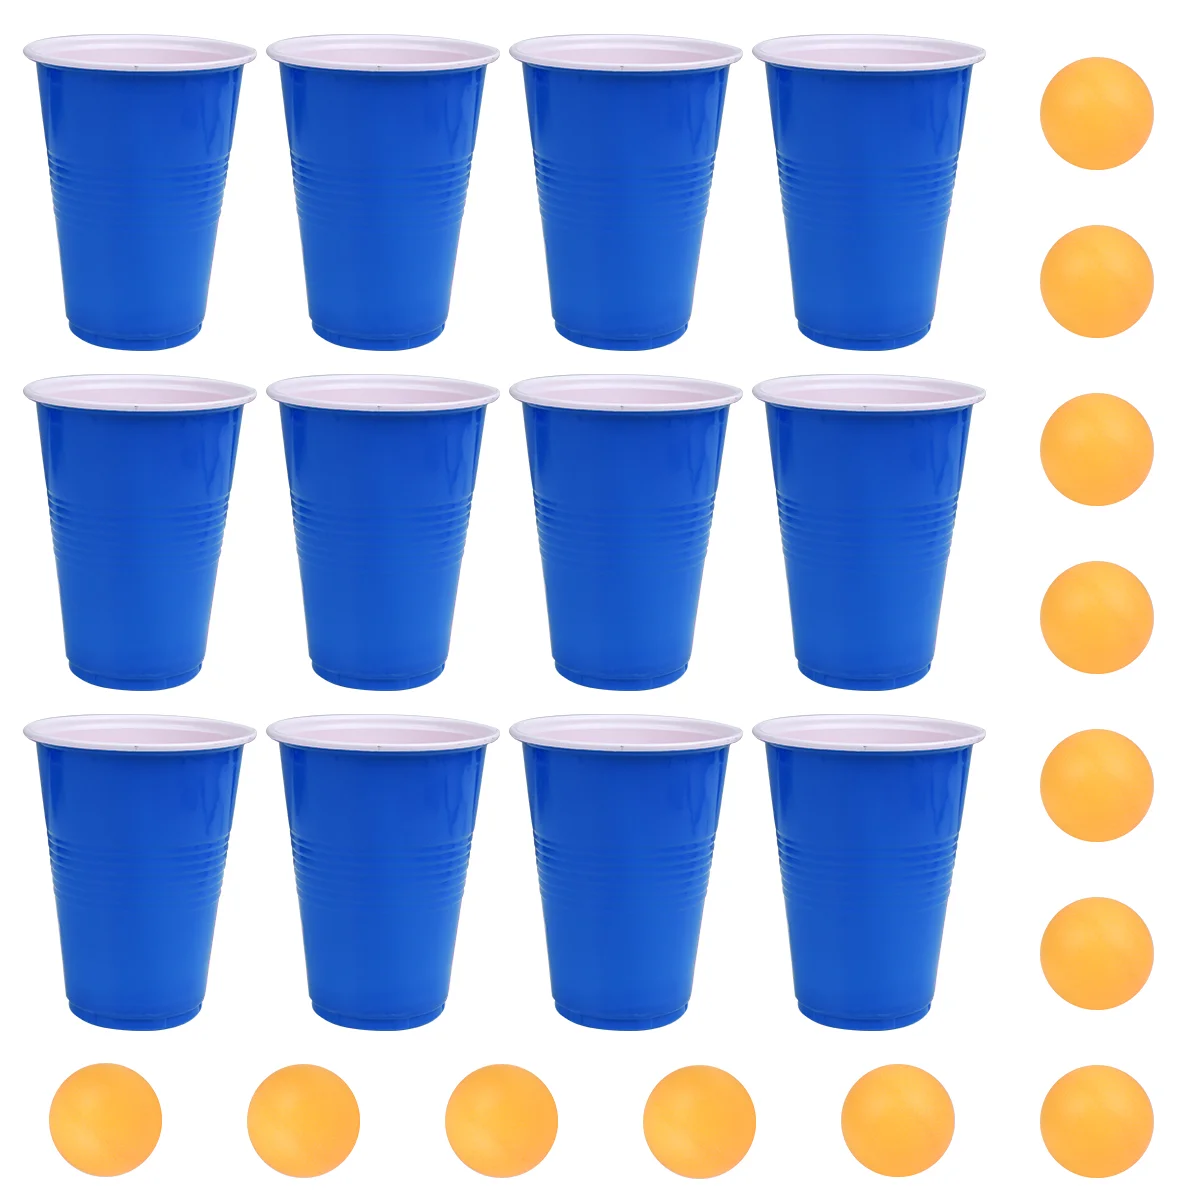 

16pcs Beer Pong Set Fun Drinking Games Novelty Jumbo Cup and Pong Throwing Game for Bar Lawn Backyard Party Blue